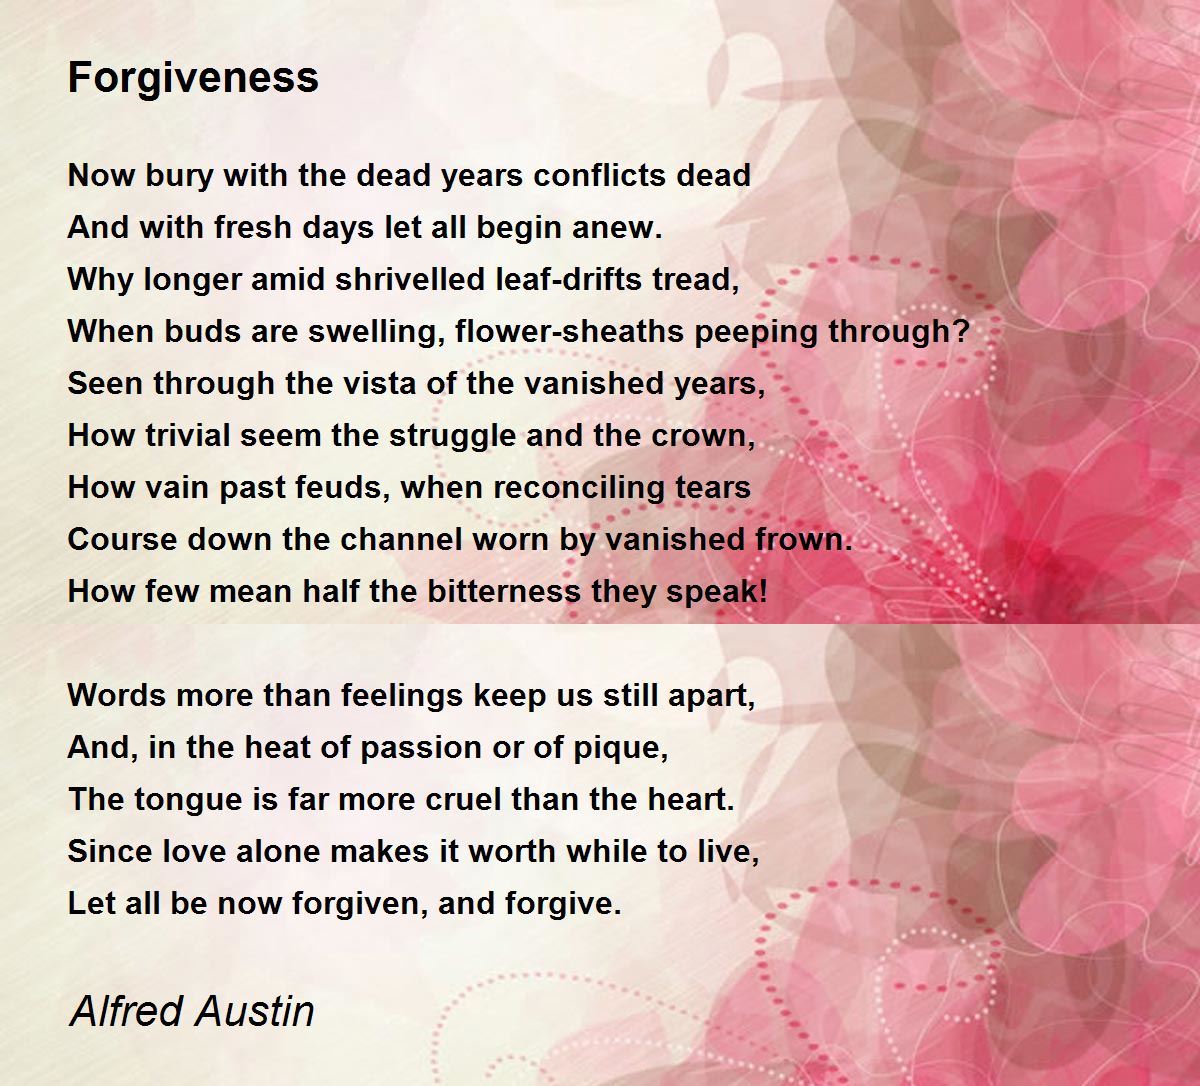 Forgiving poems someone about The Best